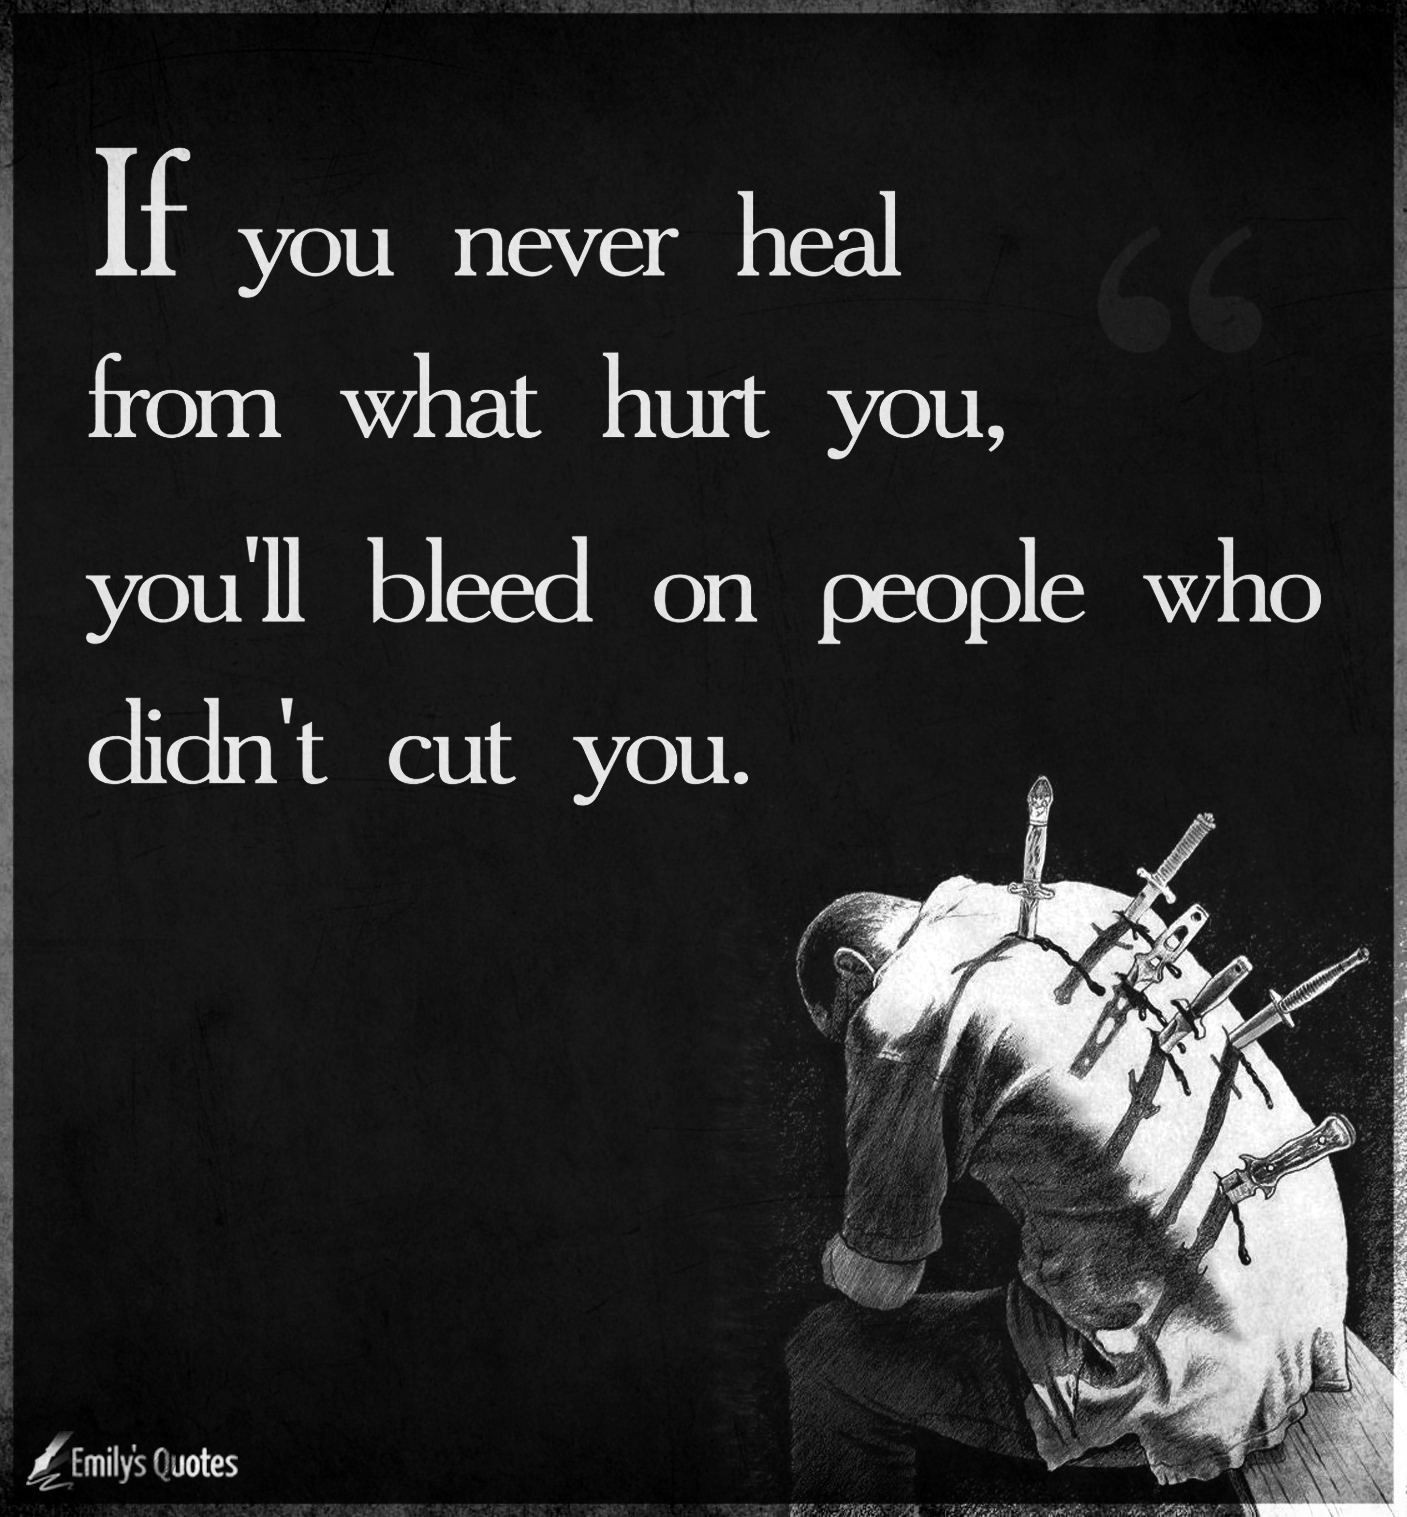 If you never heal from what hurt you, you’ll bleed on people who didn’t cut you